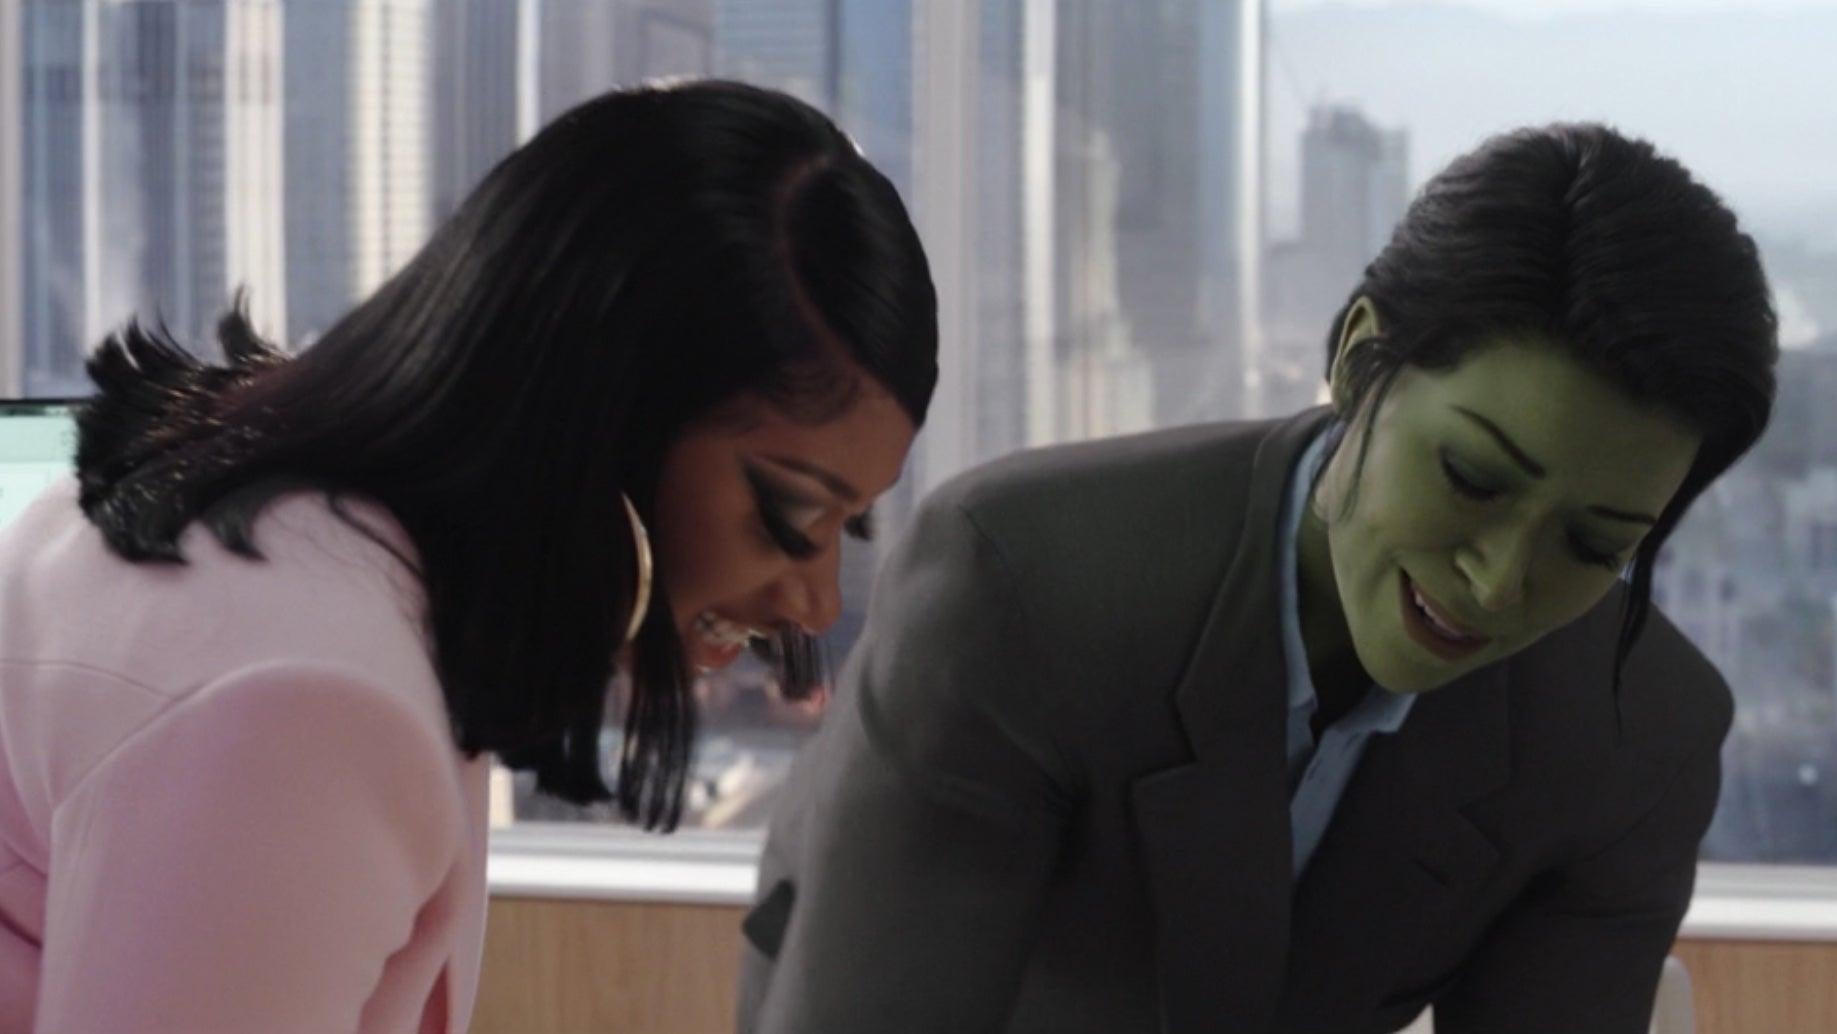 The rapper and the lawyer. (Screenshot: Disney+/Marvel Studios)